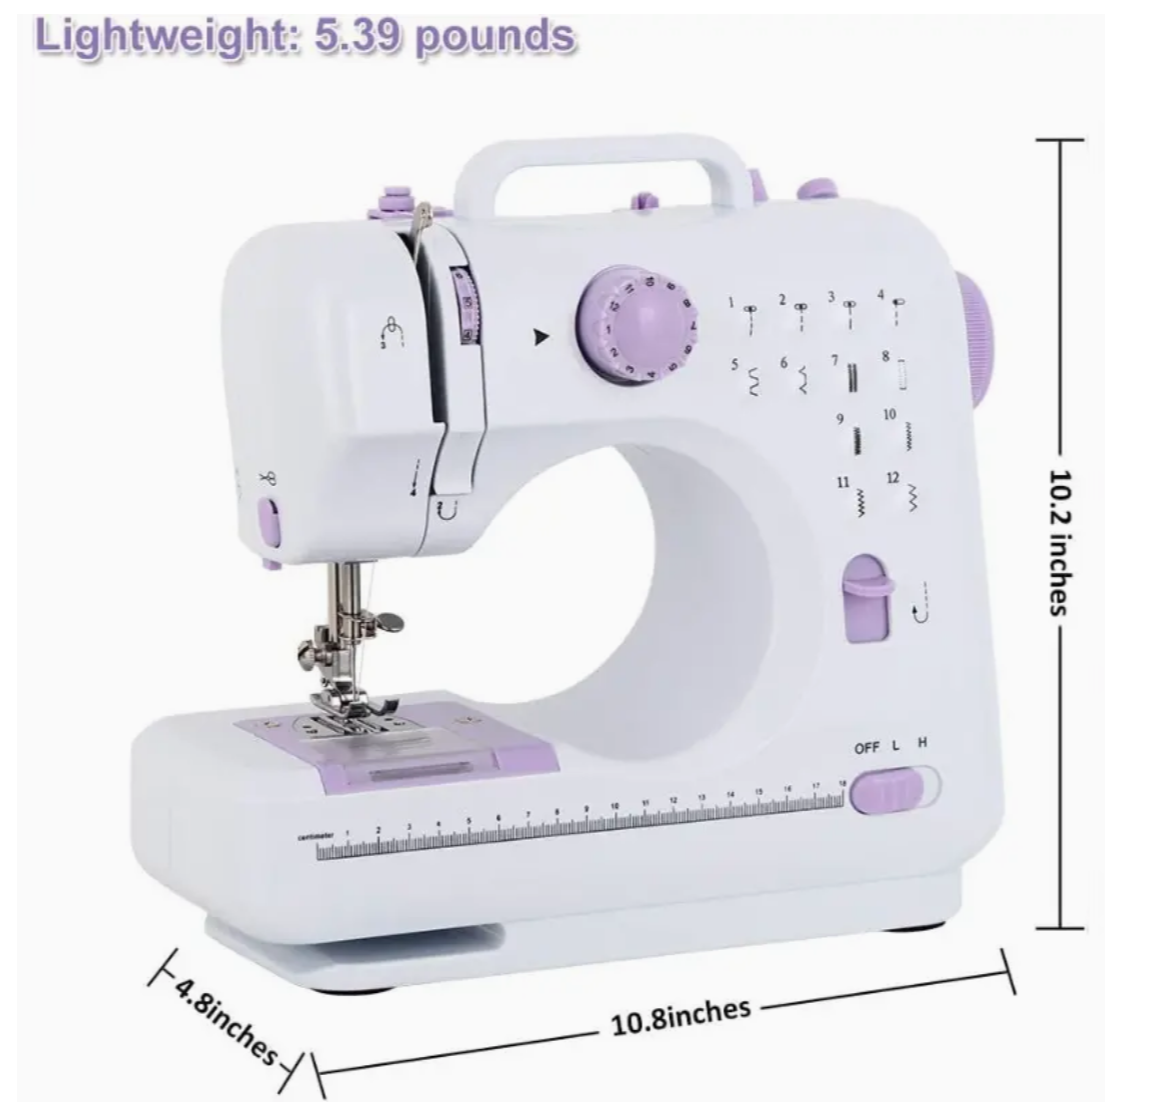 Purple Passion: 505 Electric Sewing Machine for Beginners – Portable, Precise, and Packed with 12 Built-in Stitches!